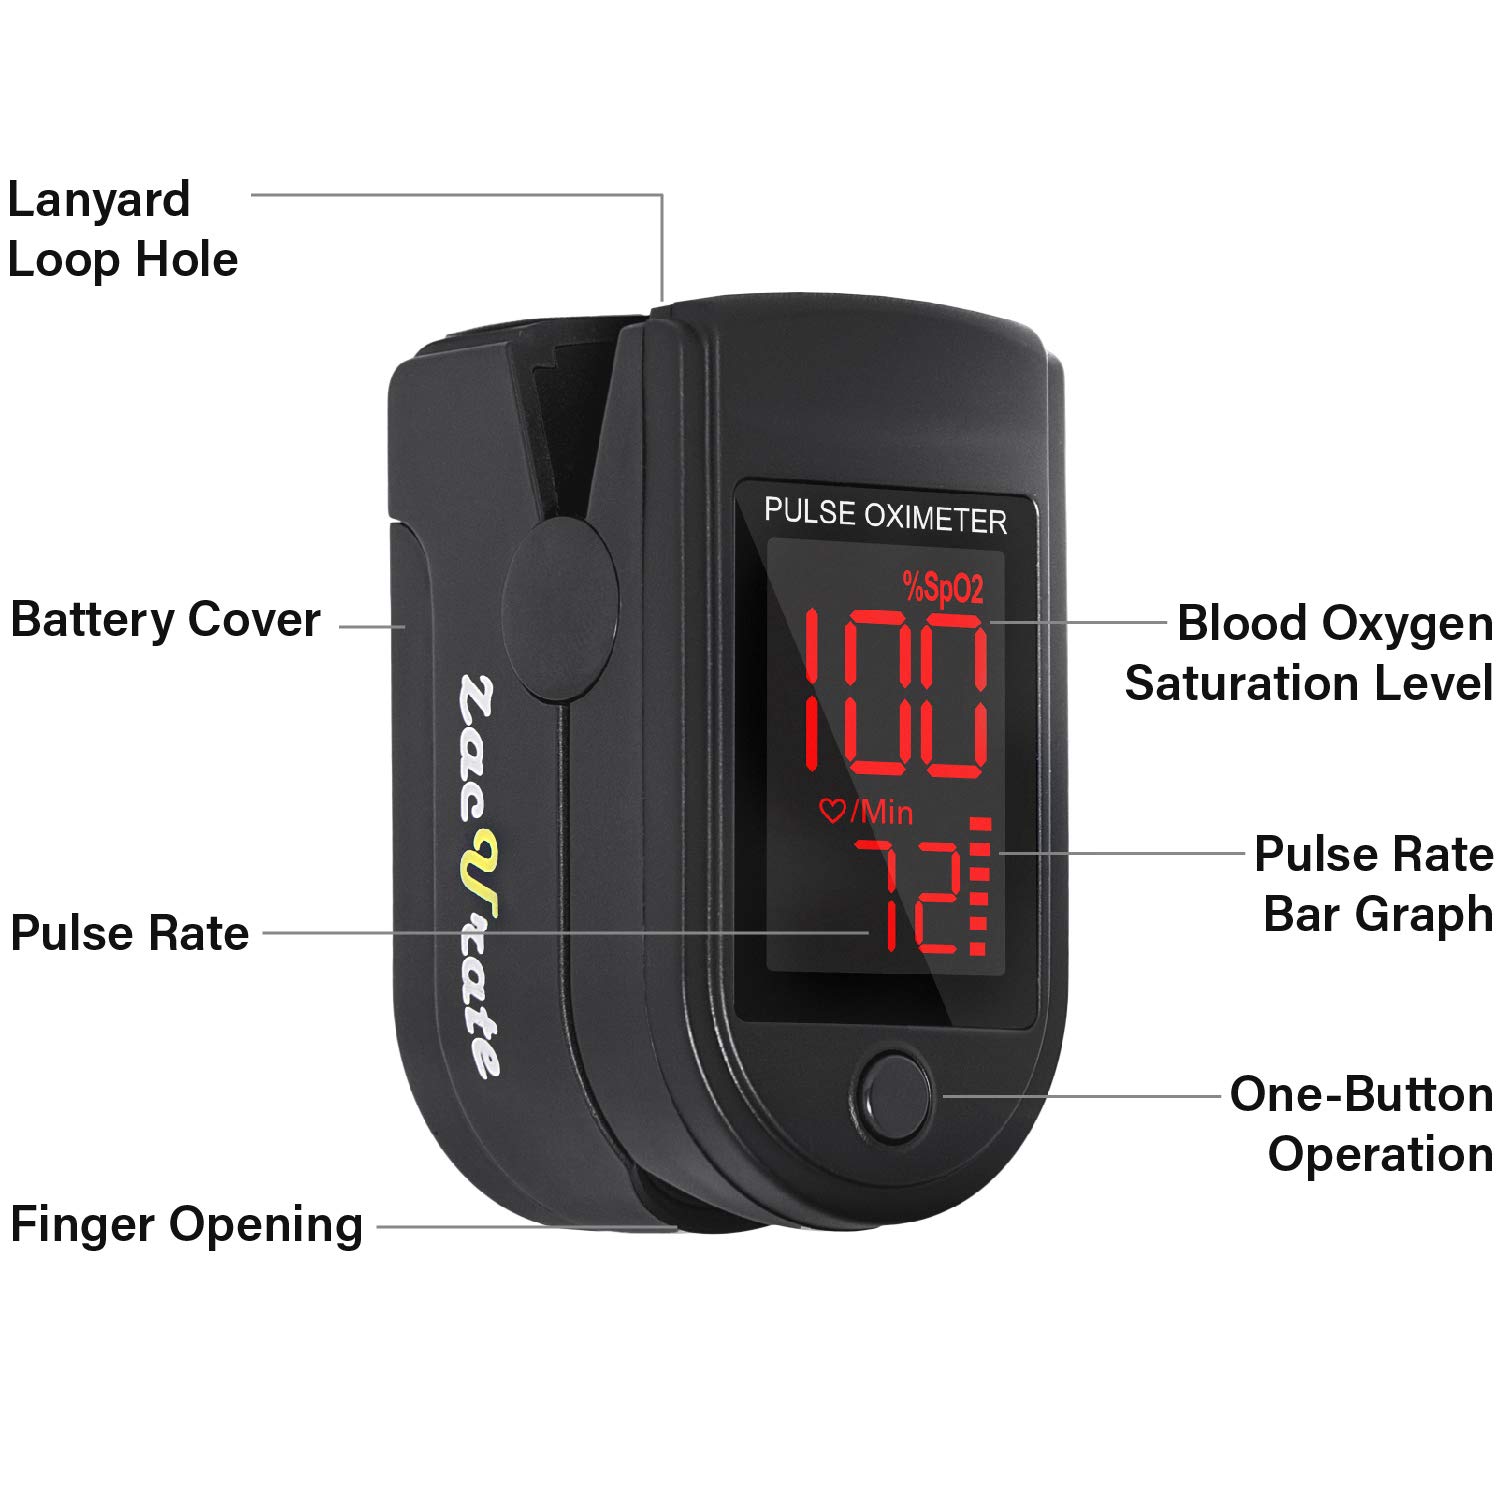 Zacurate Pro Series 500DL Fingertip Pulse Oximeter Blood Oxygen Saturation Monitor with silicon cover, batteries and lanyard (Mystic Black)